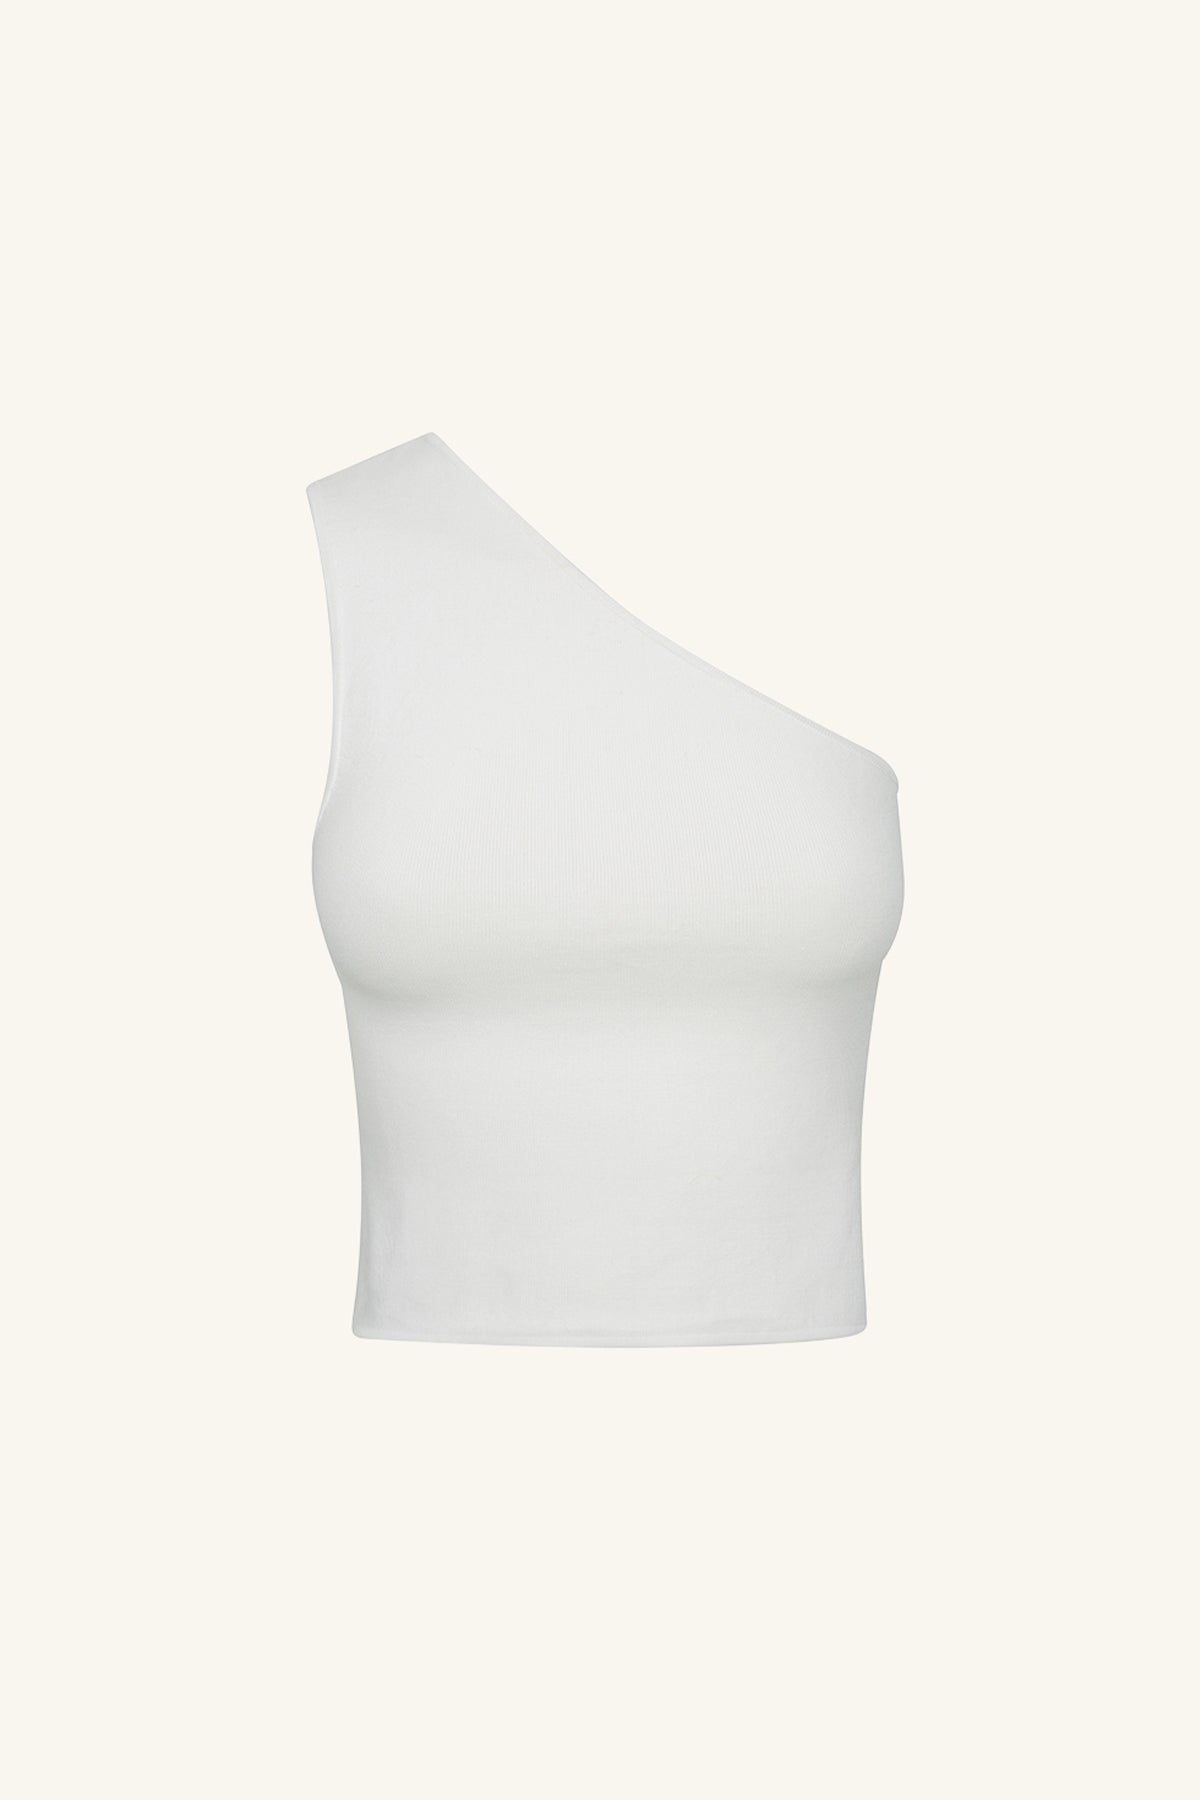 Best Thing Ivory Ruched Cropped Halter Tank Top